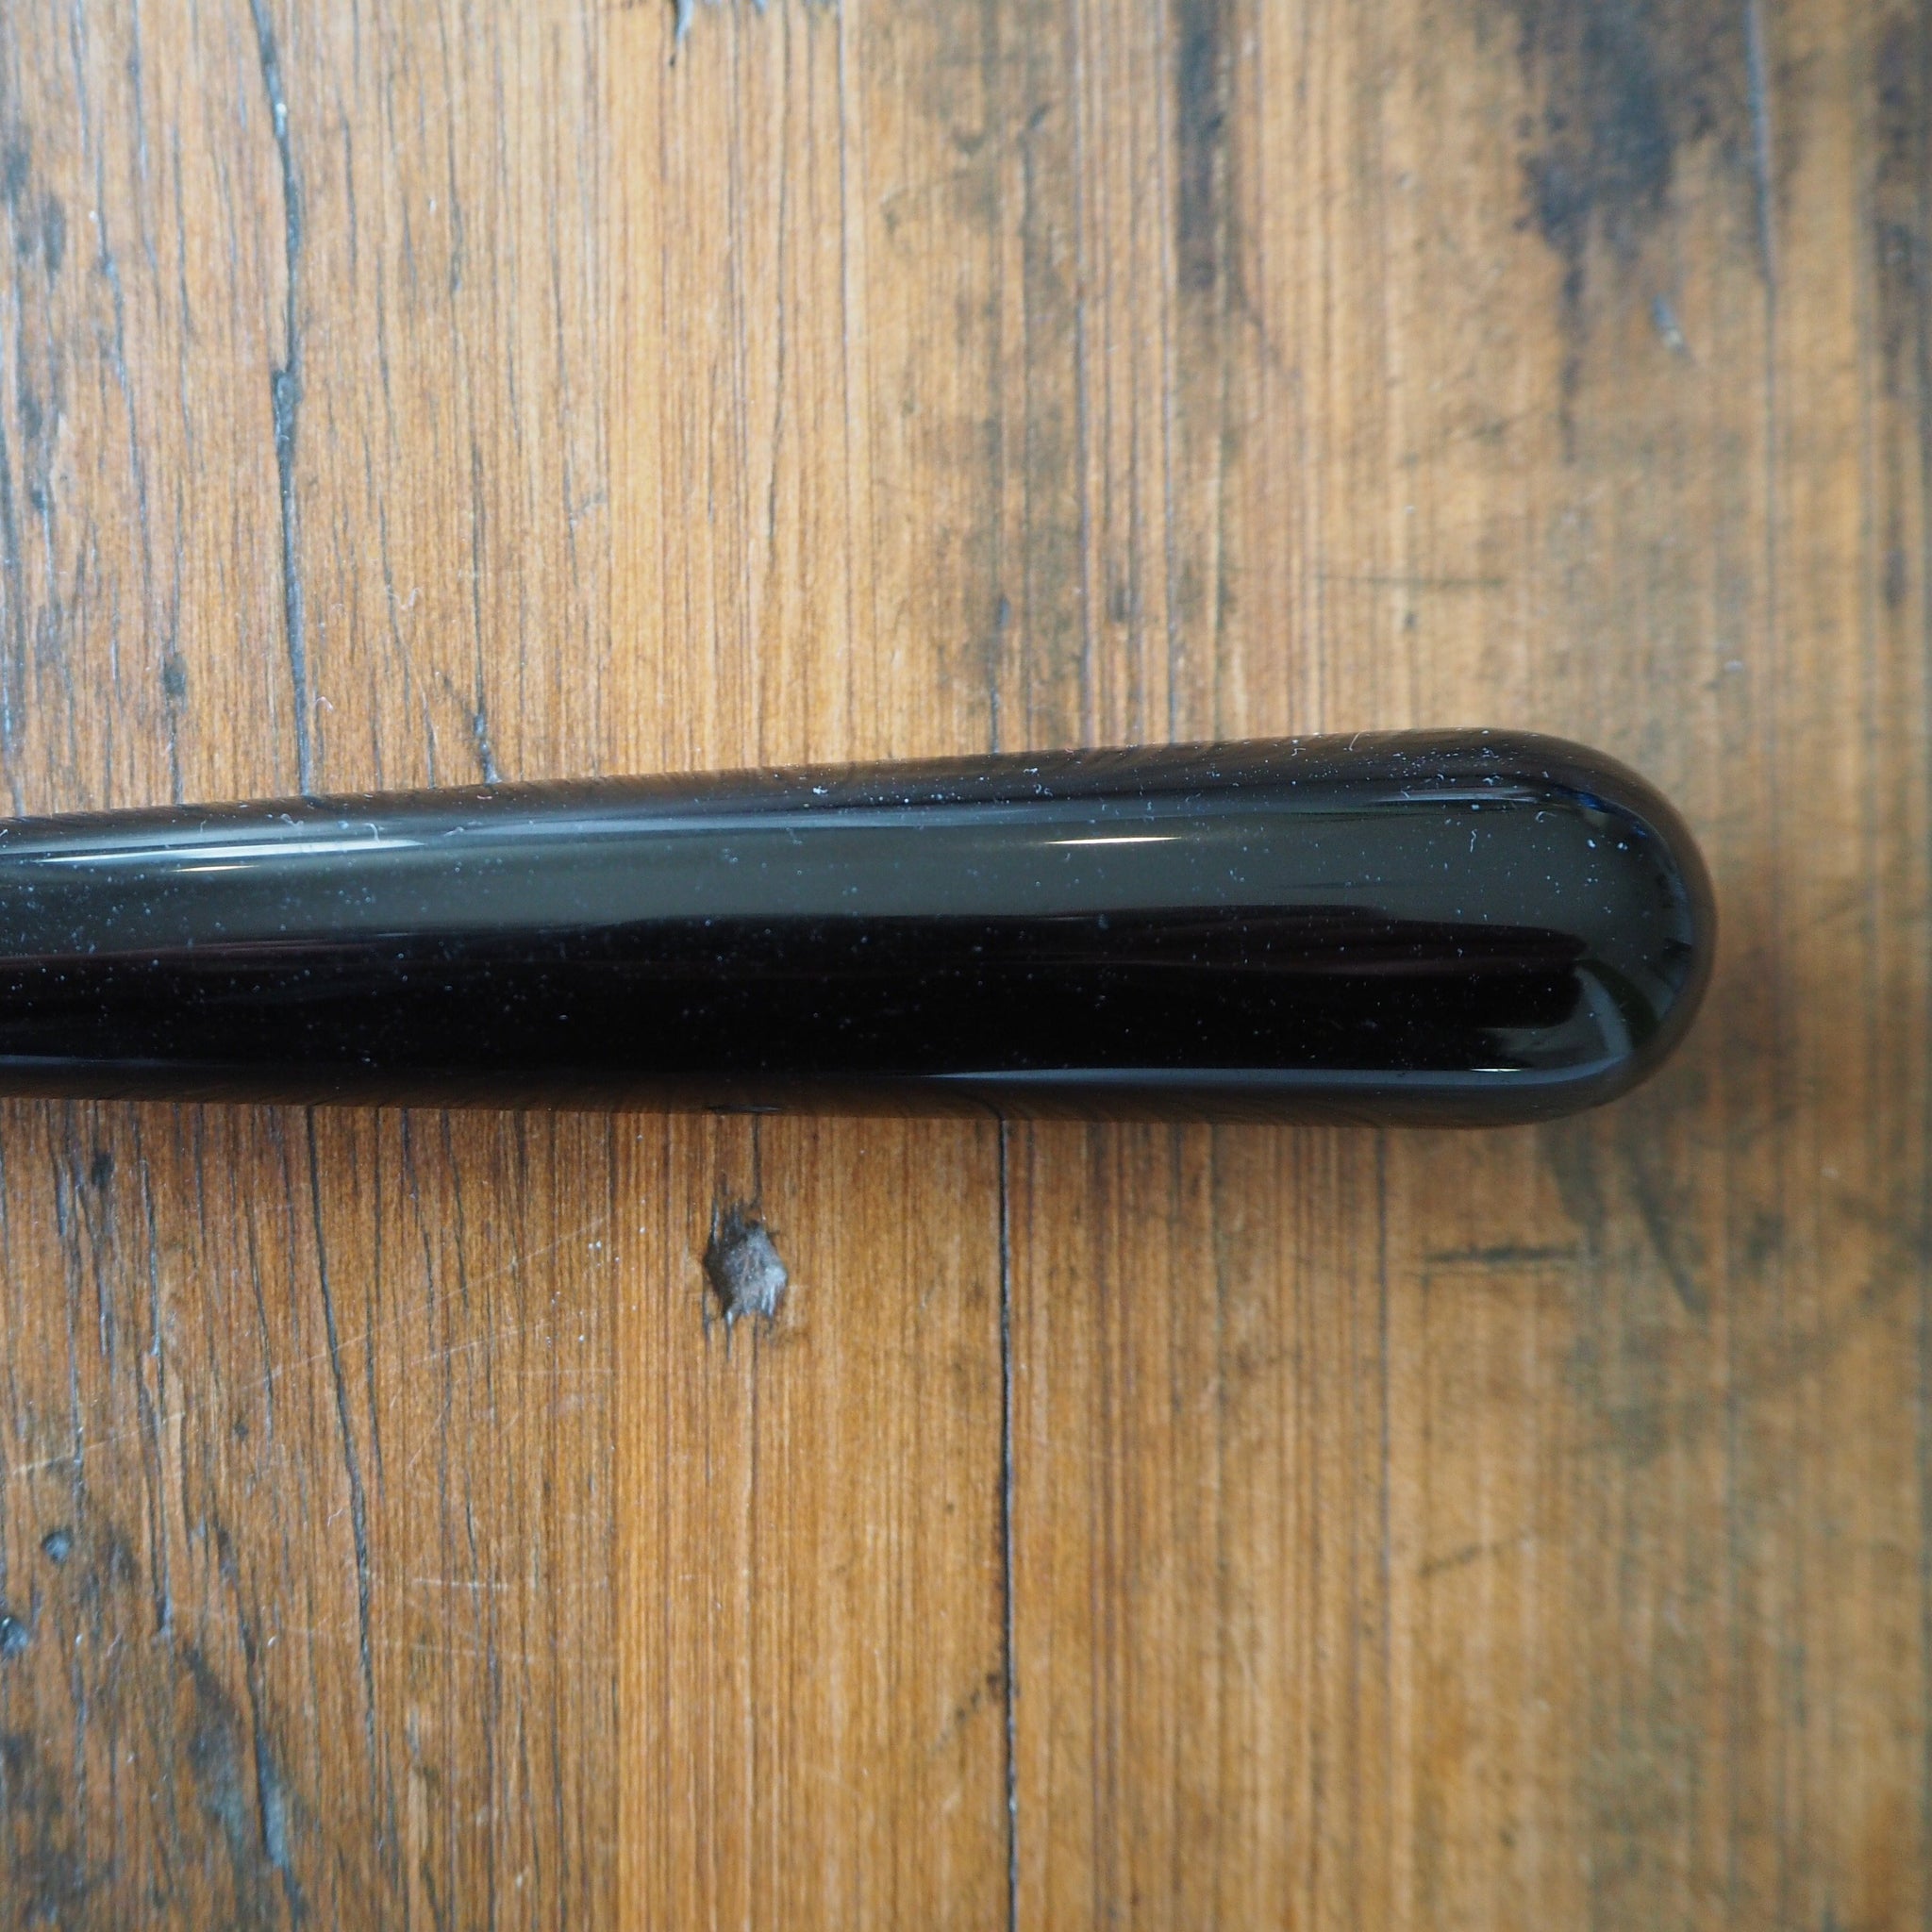 Small black obsidian yoni wand on wooden background